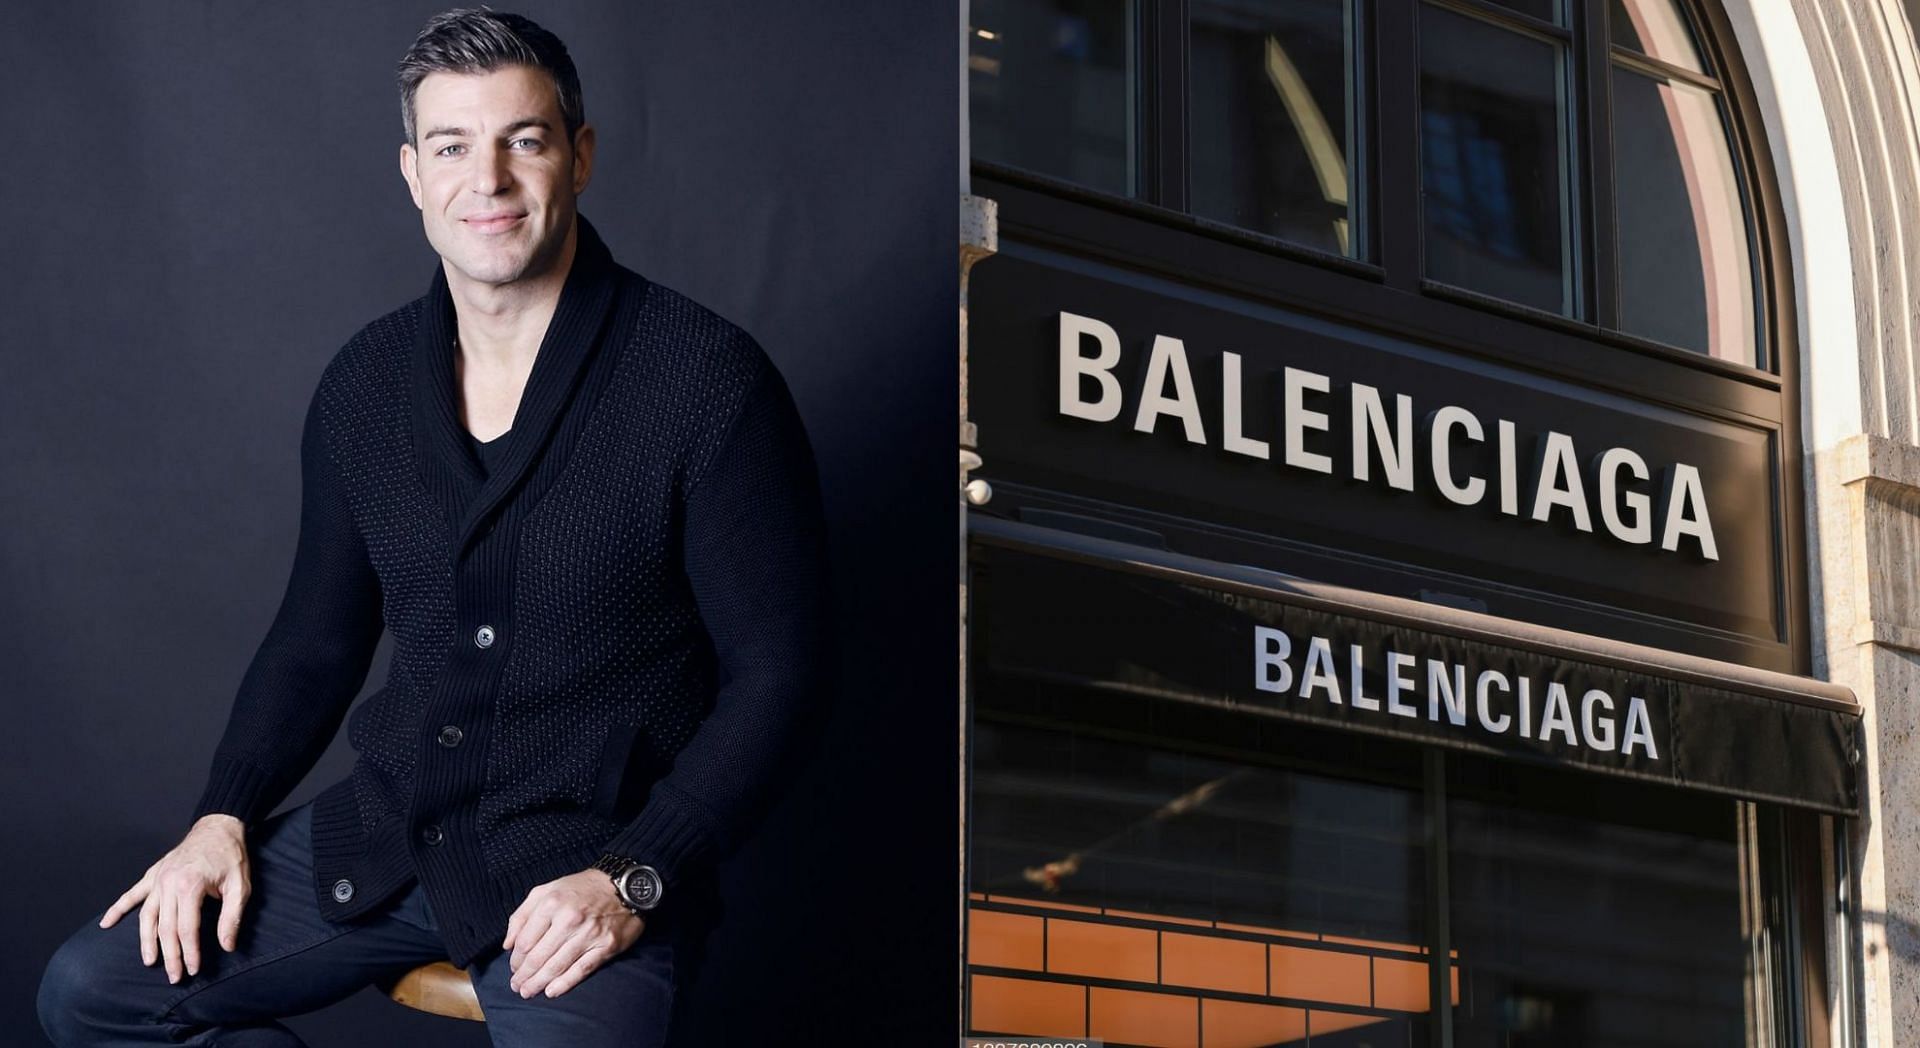 Jeff Schroeder slammed Hollywood stars over delayed response to Balenciaga scandal (Image via Getty Images)